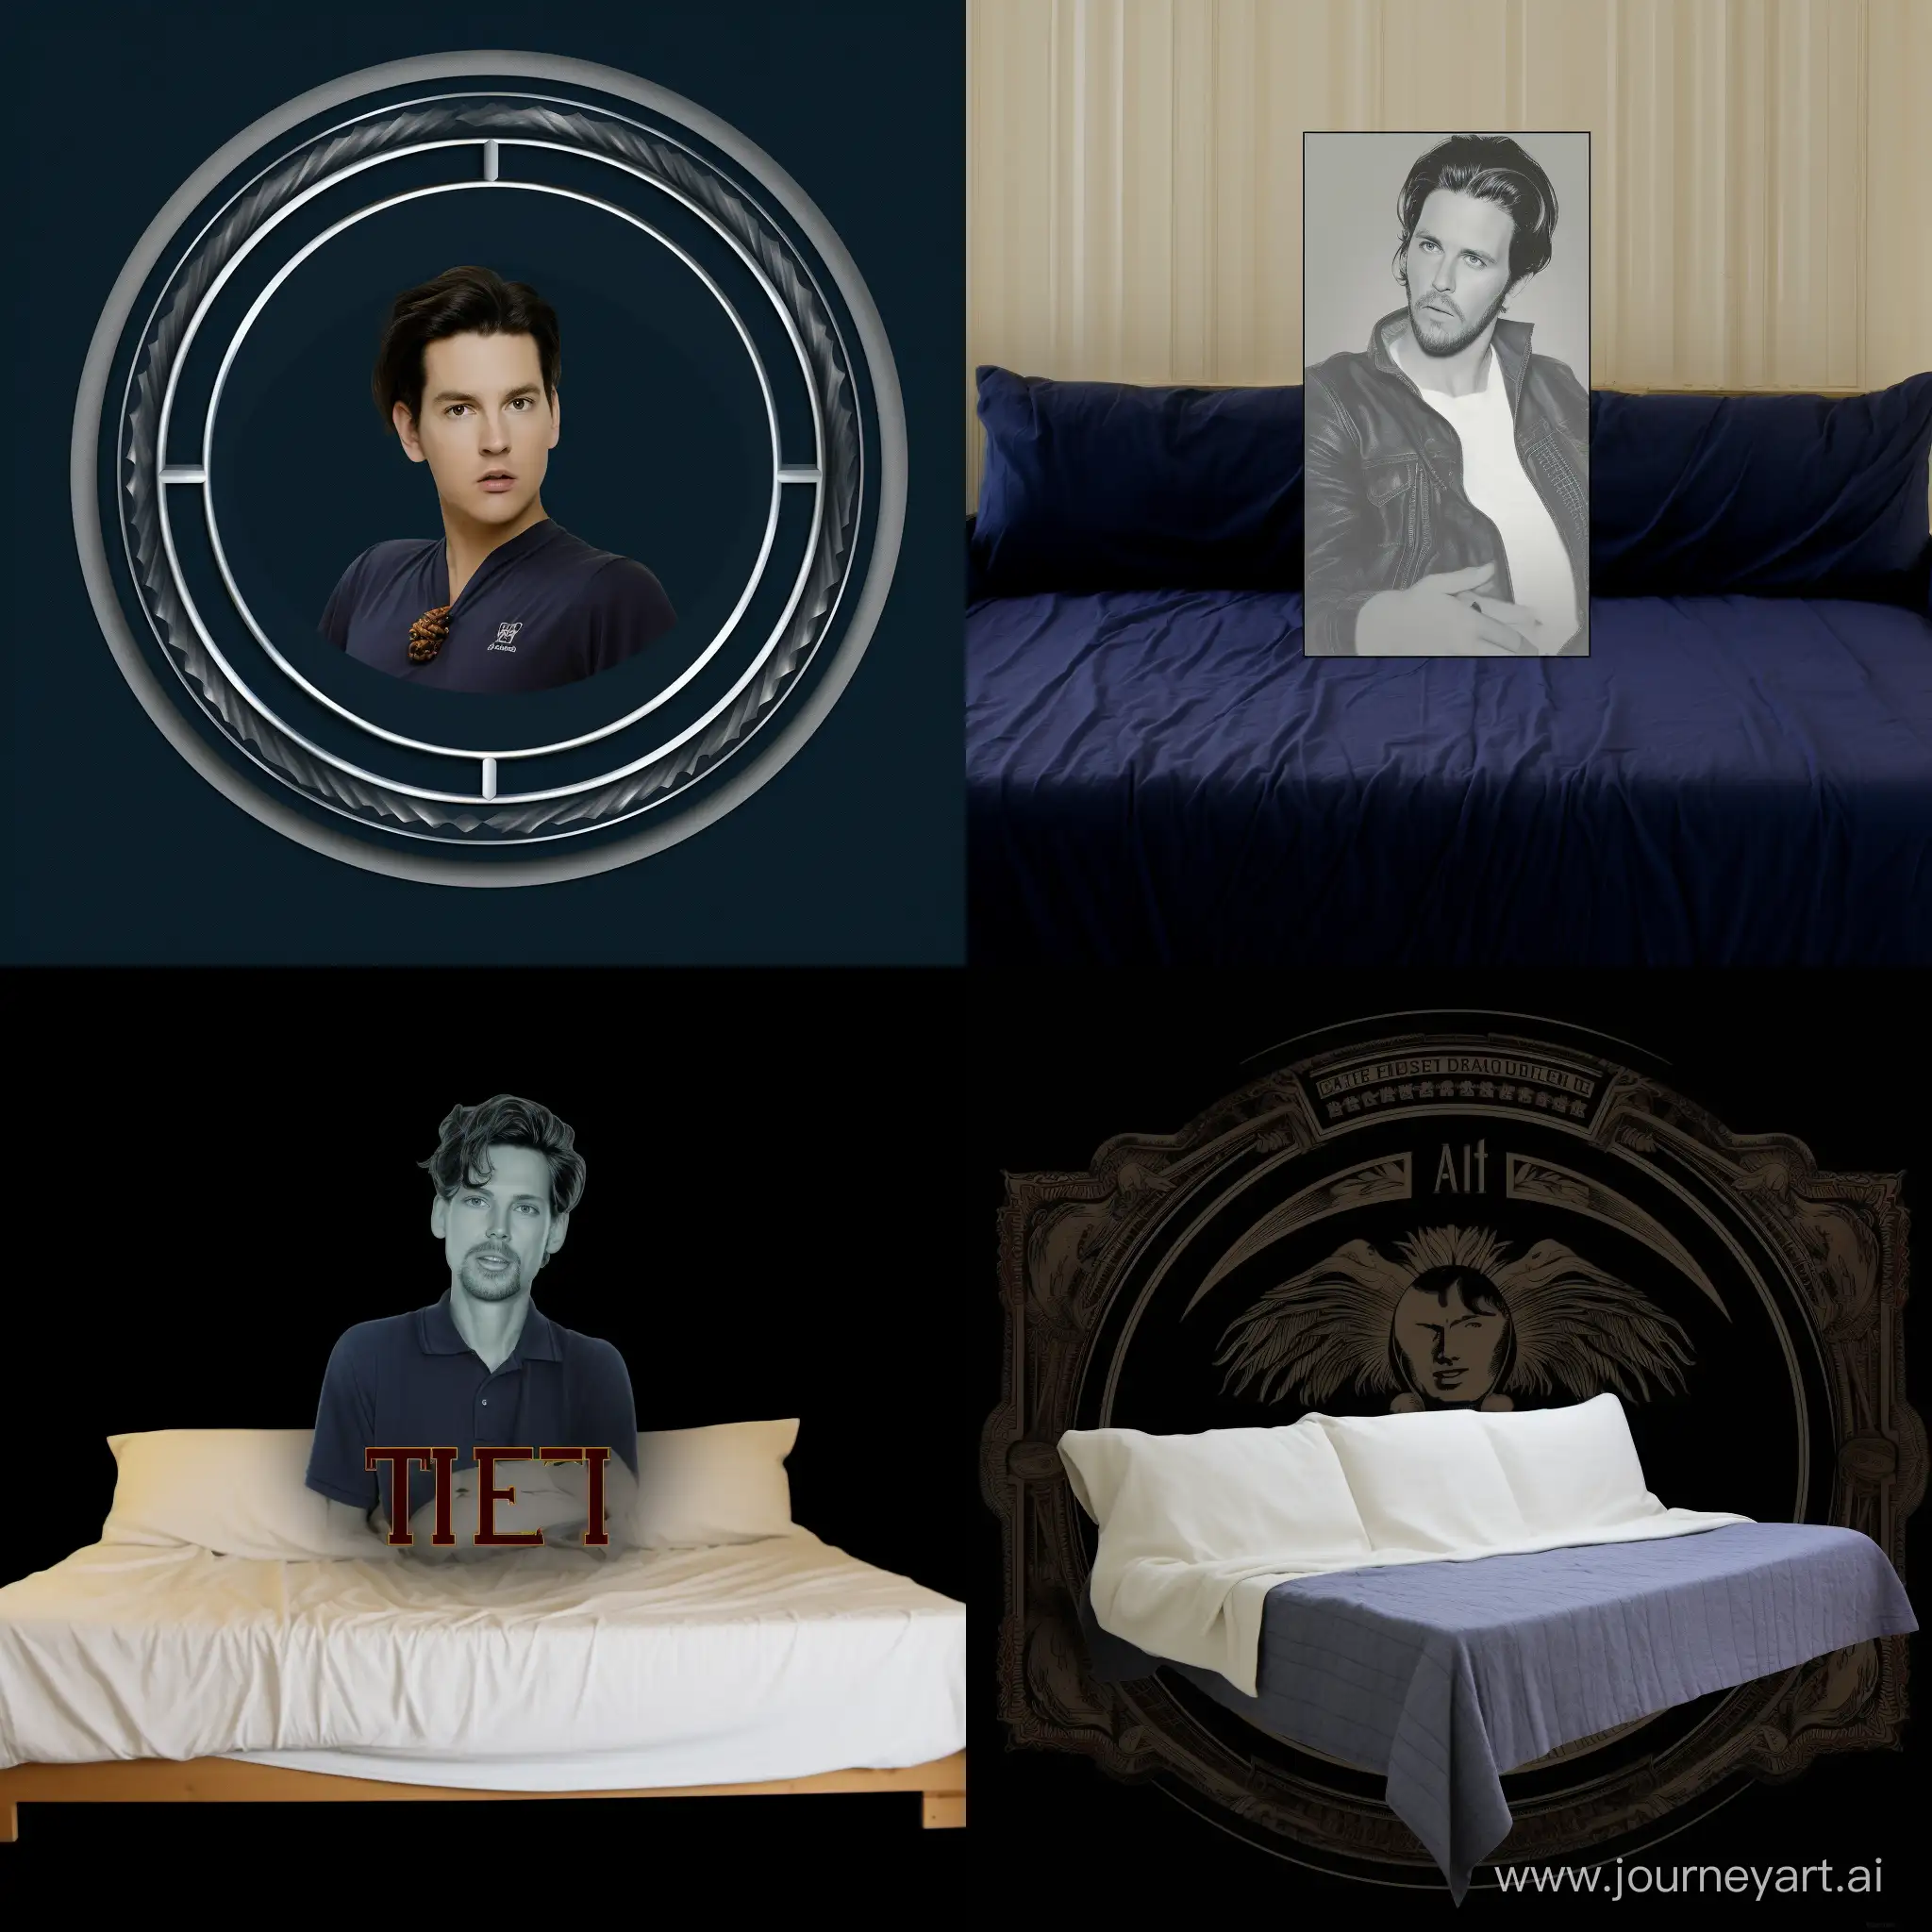 Benedict-Cumberbatch-as-Doctor-Strange-Relaxing-on-Bed-in-Casual-Attire